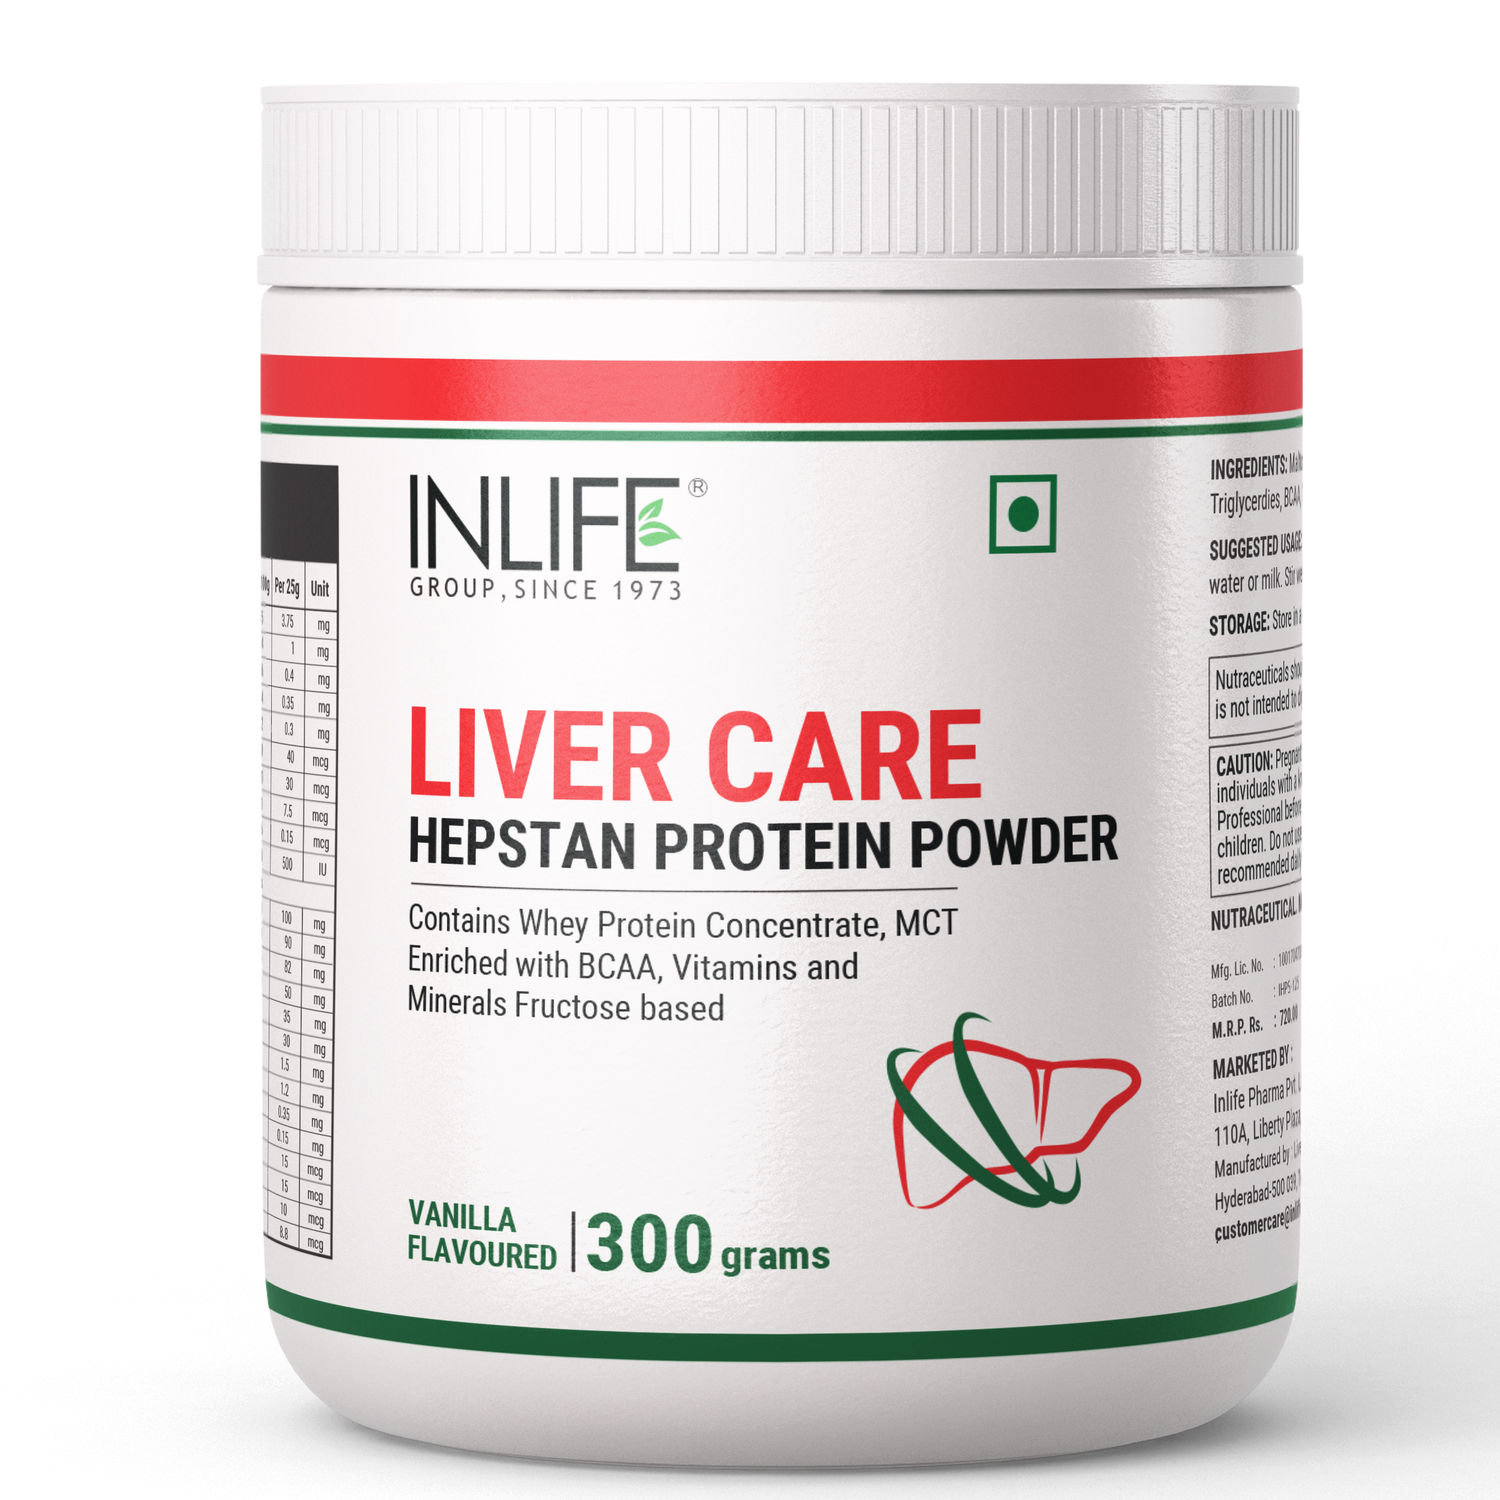 Buy Inlife Hepstan Liver Care Support Protein Powder Supplement Whey Protein Vitamins Minerals